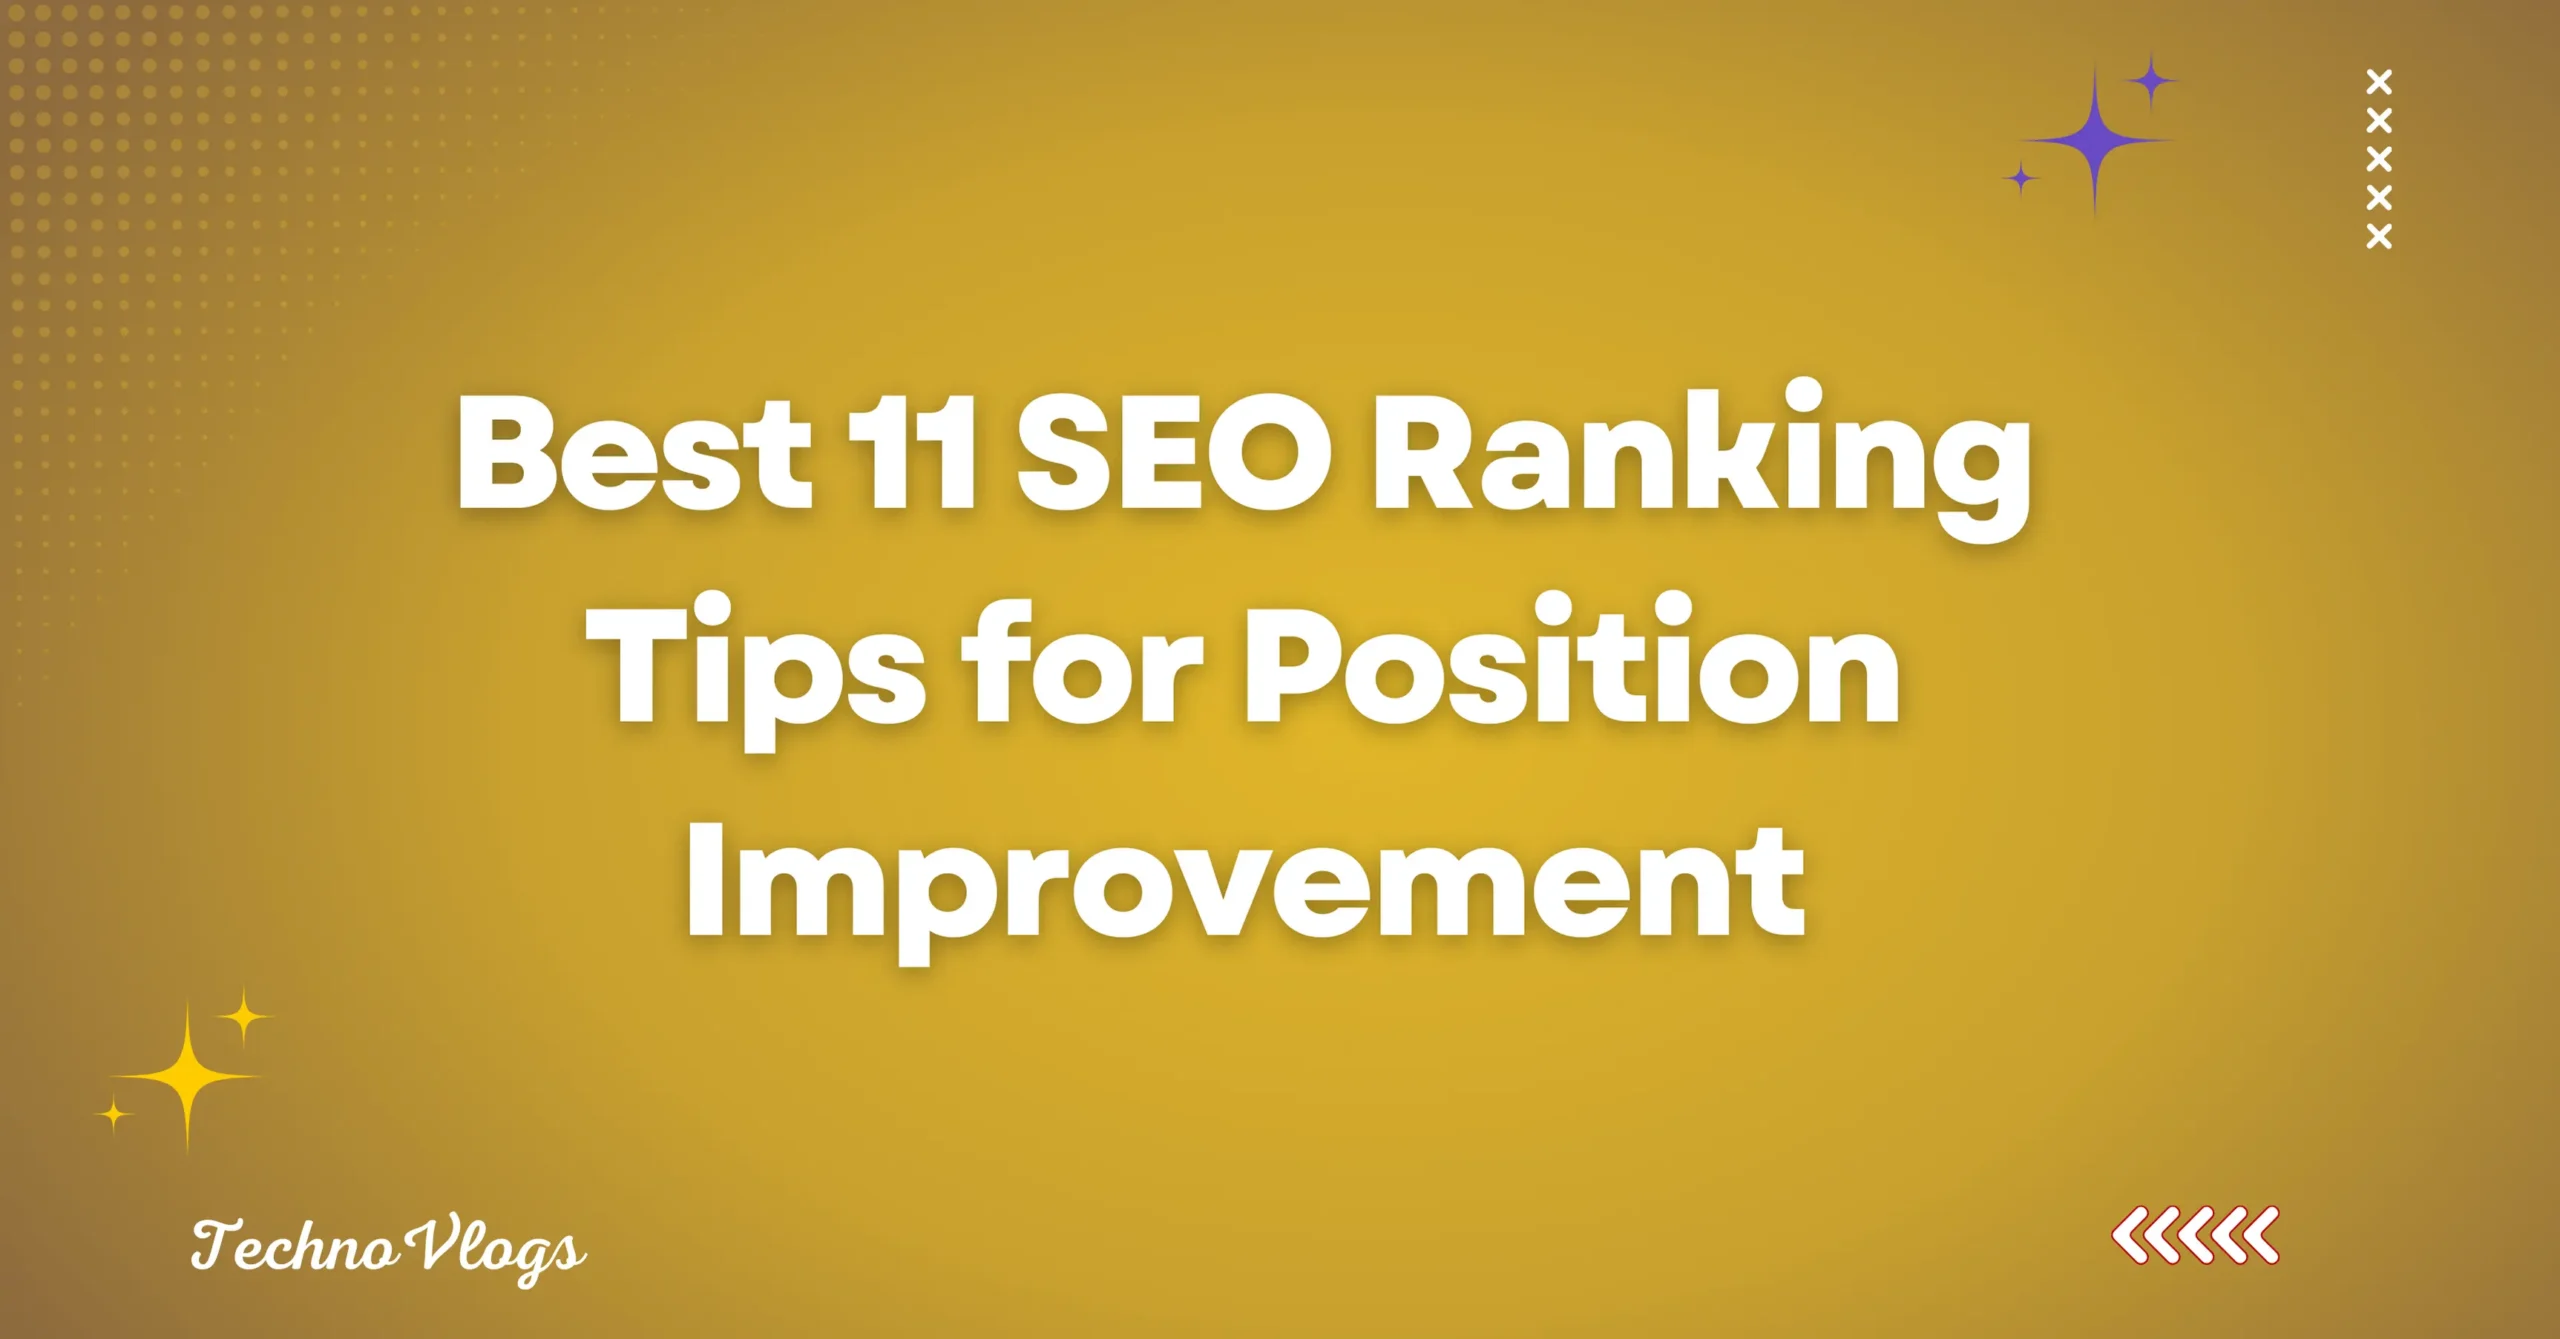 Best 11 SEO Ranking Tips for Position Improvement